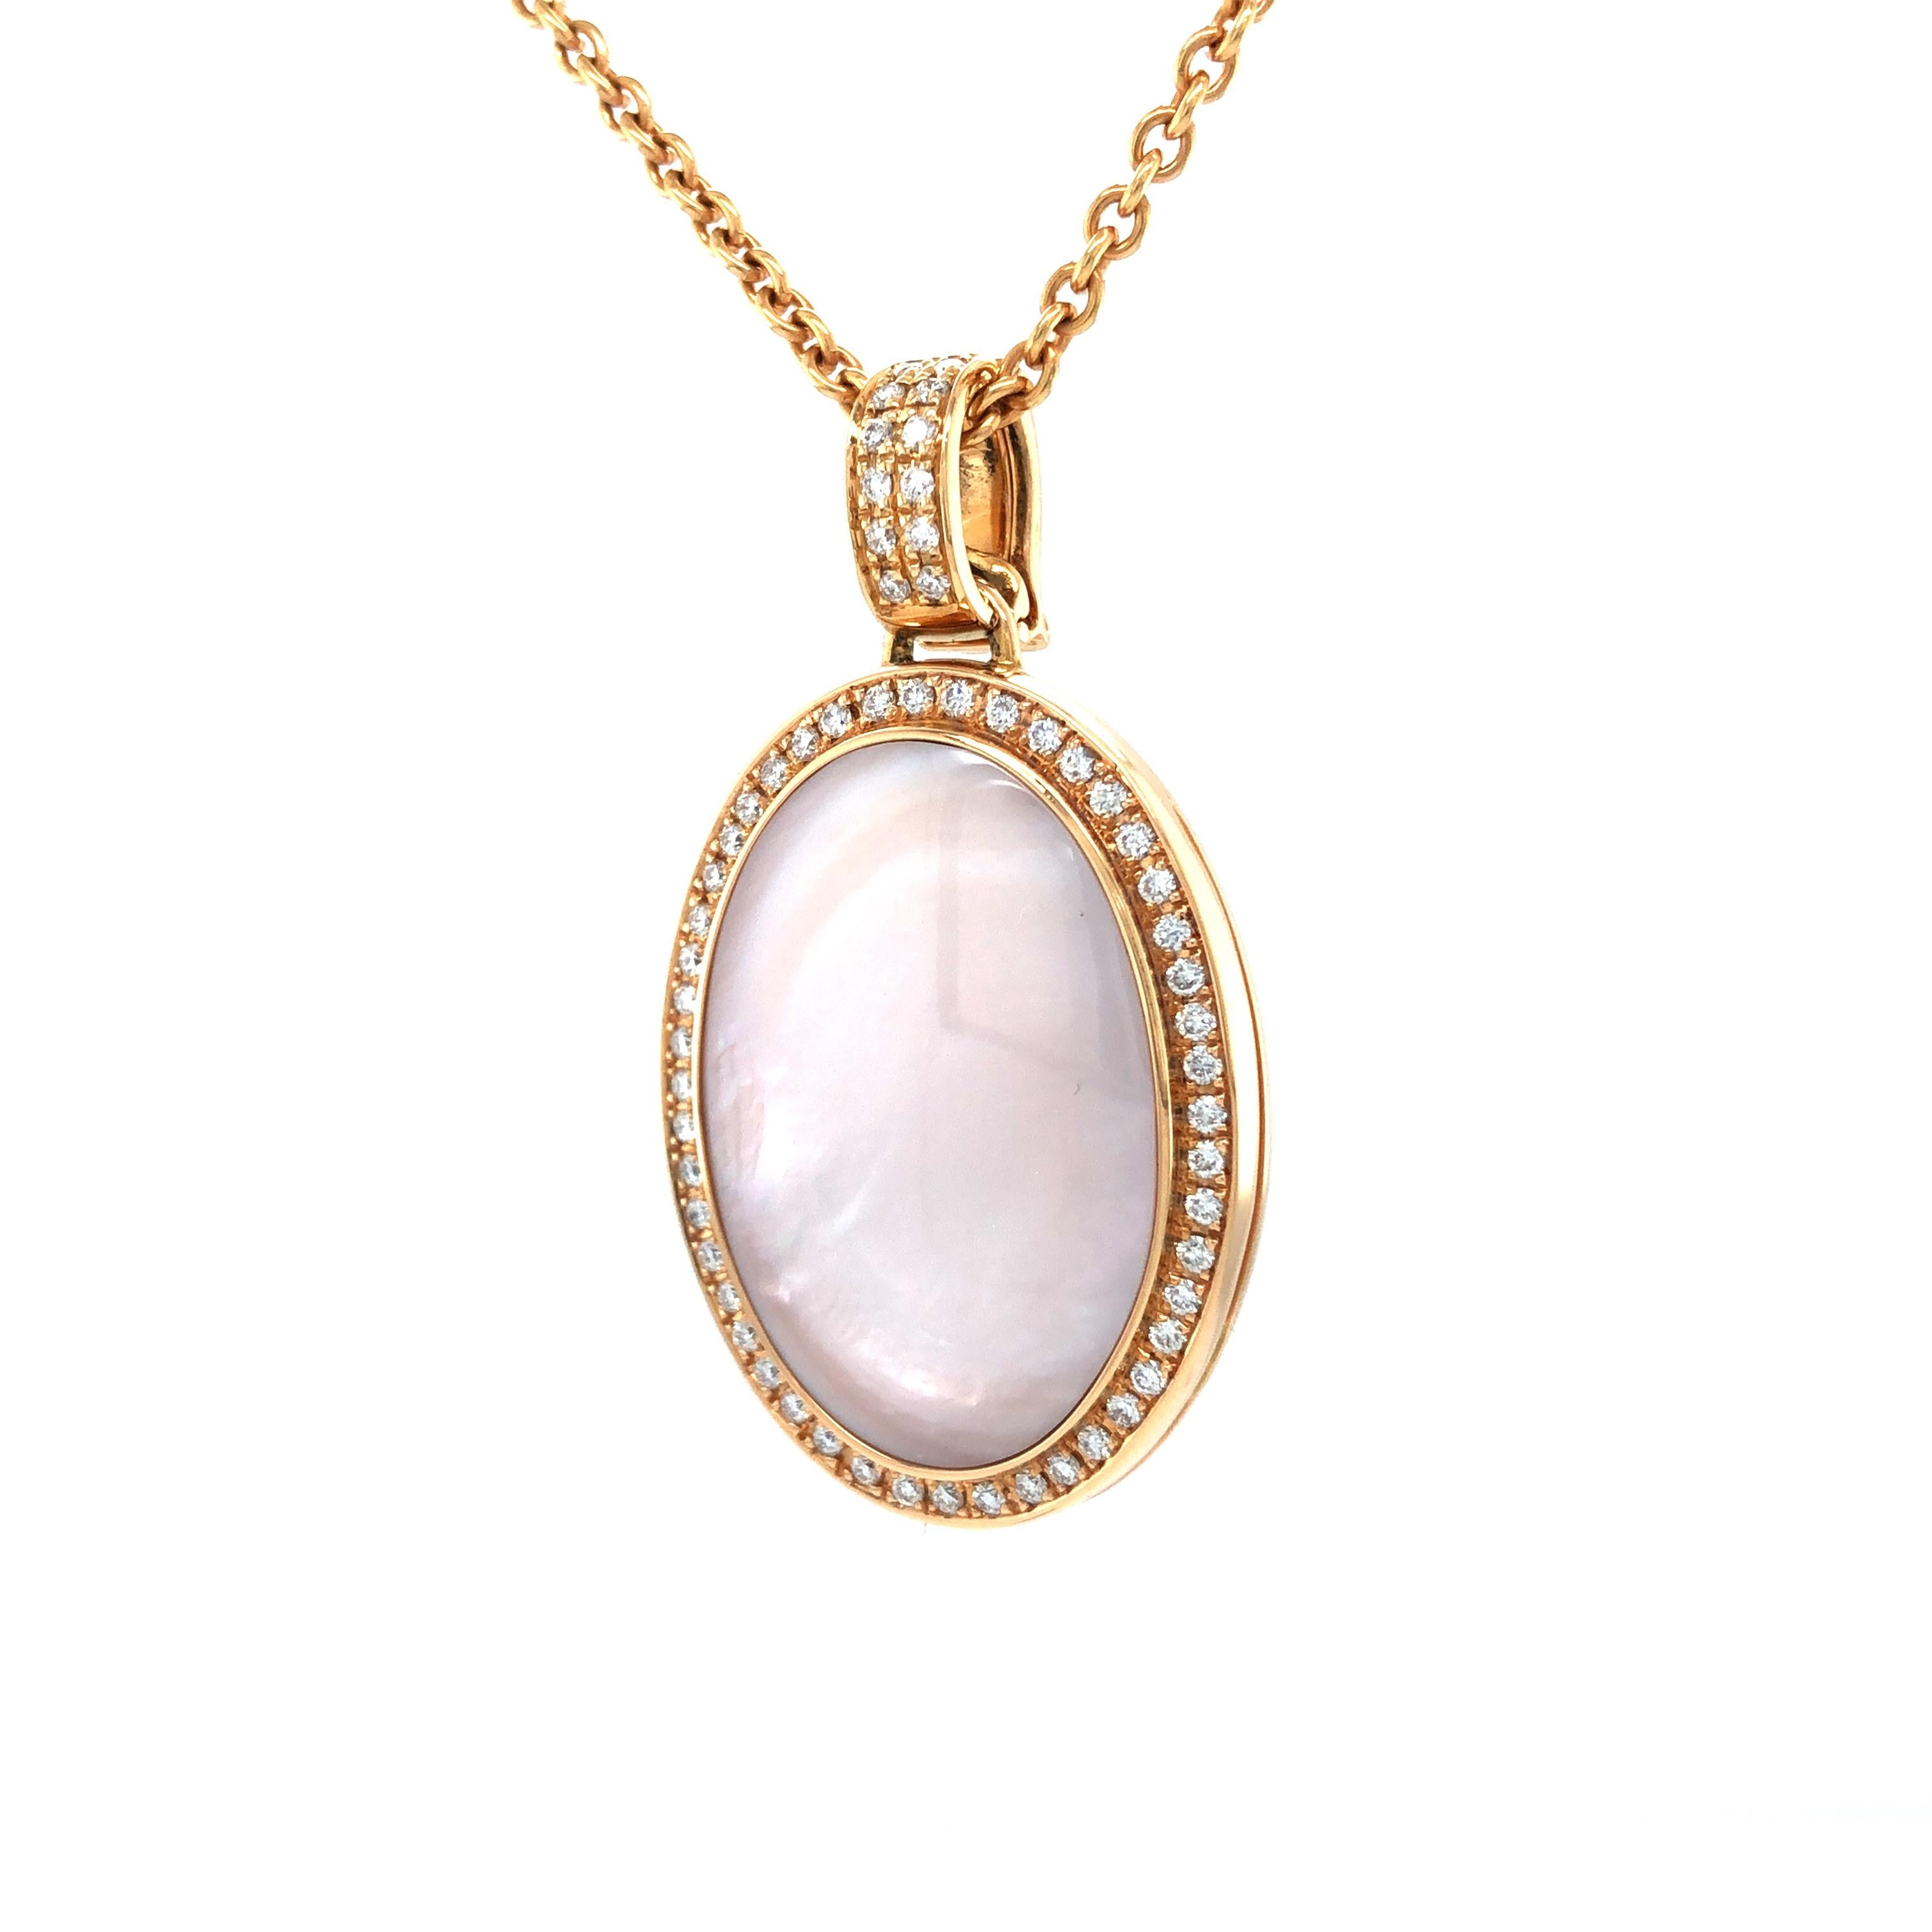 Contemporary Pendant Locket Necklace 18k Yellow Gold 60 Diamonds 0.60 ct H VS Cut Pearl Pink For Sale